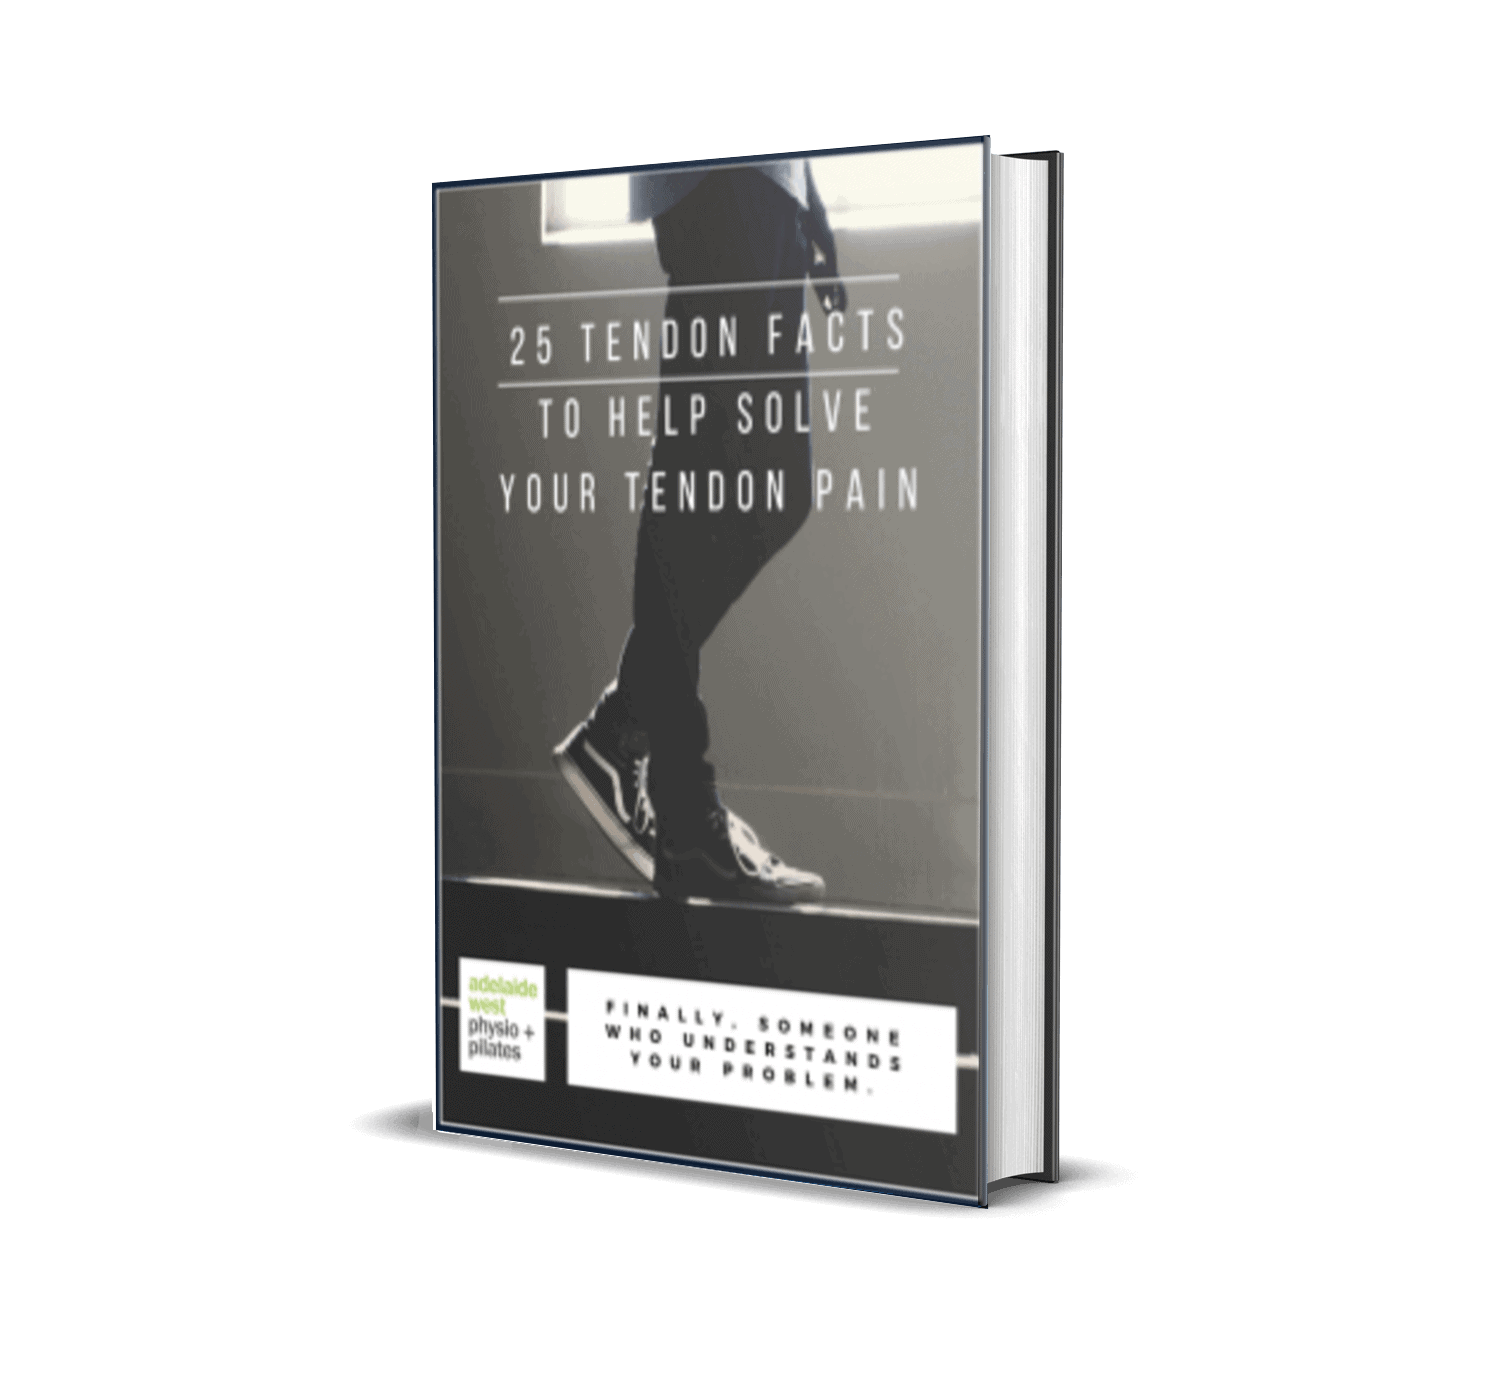 25 Tendon Facts To Help Solve Your Tendon Pain: Free Patient Resources - Adelaide West Physio + Pilates | Headache Clinic